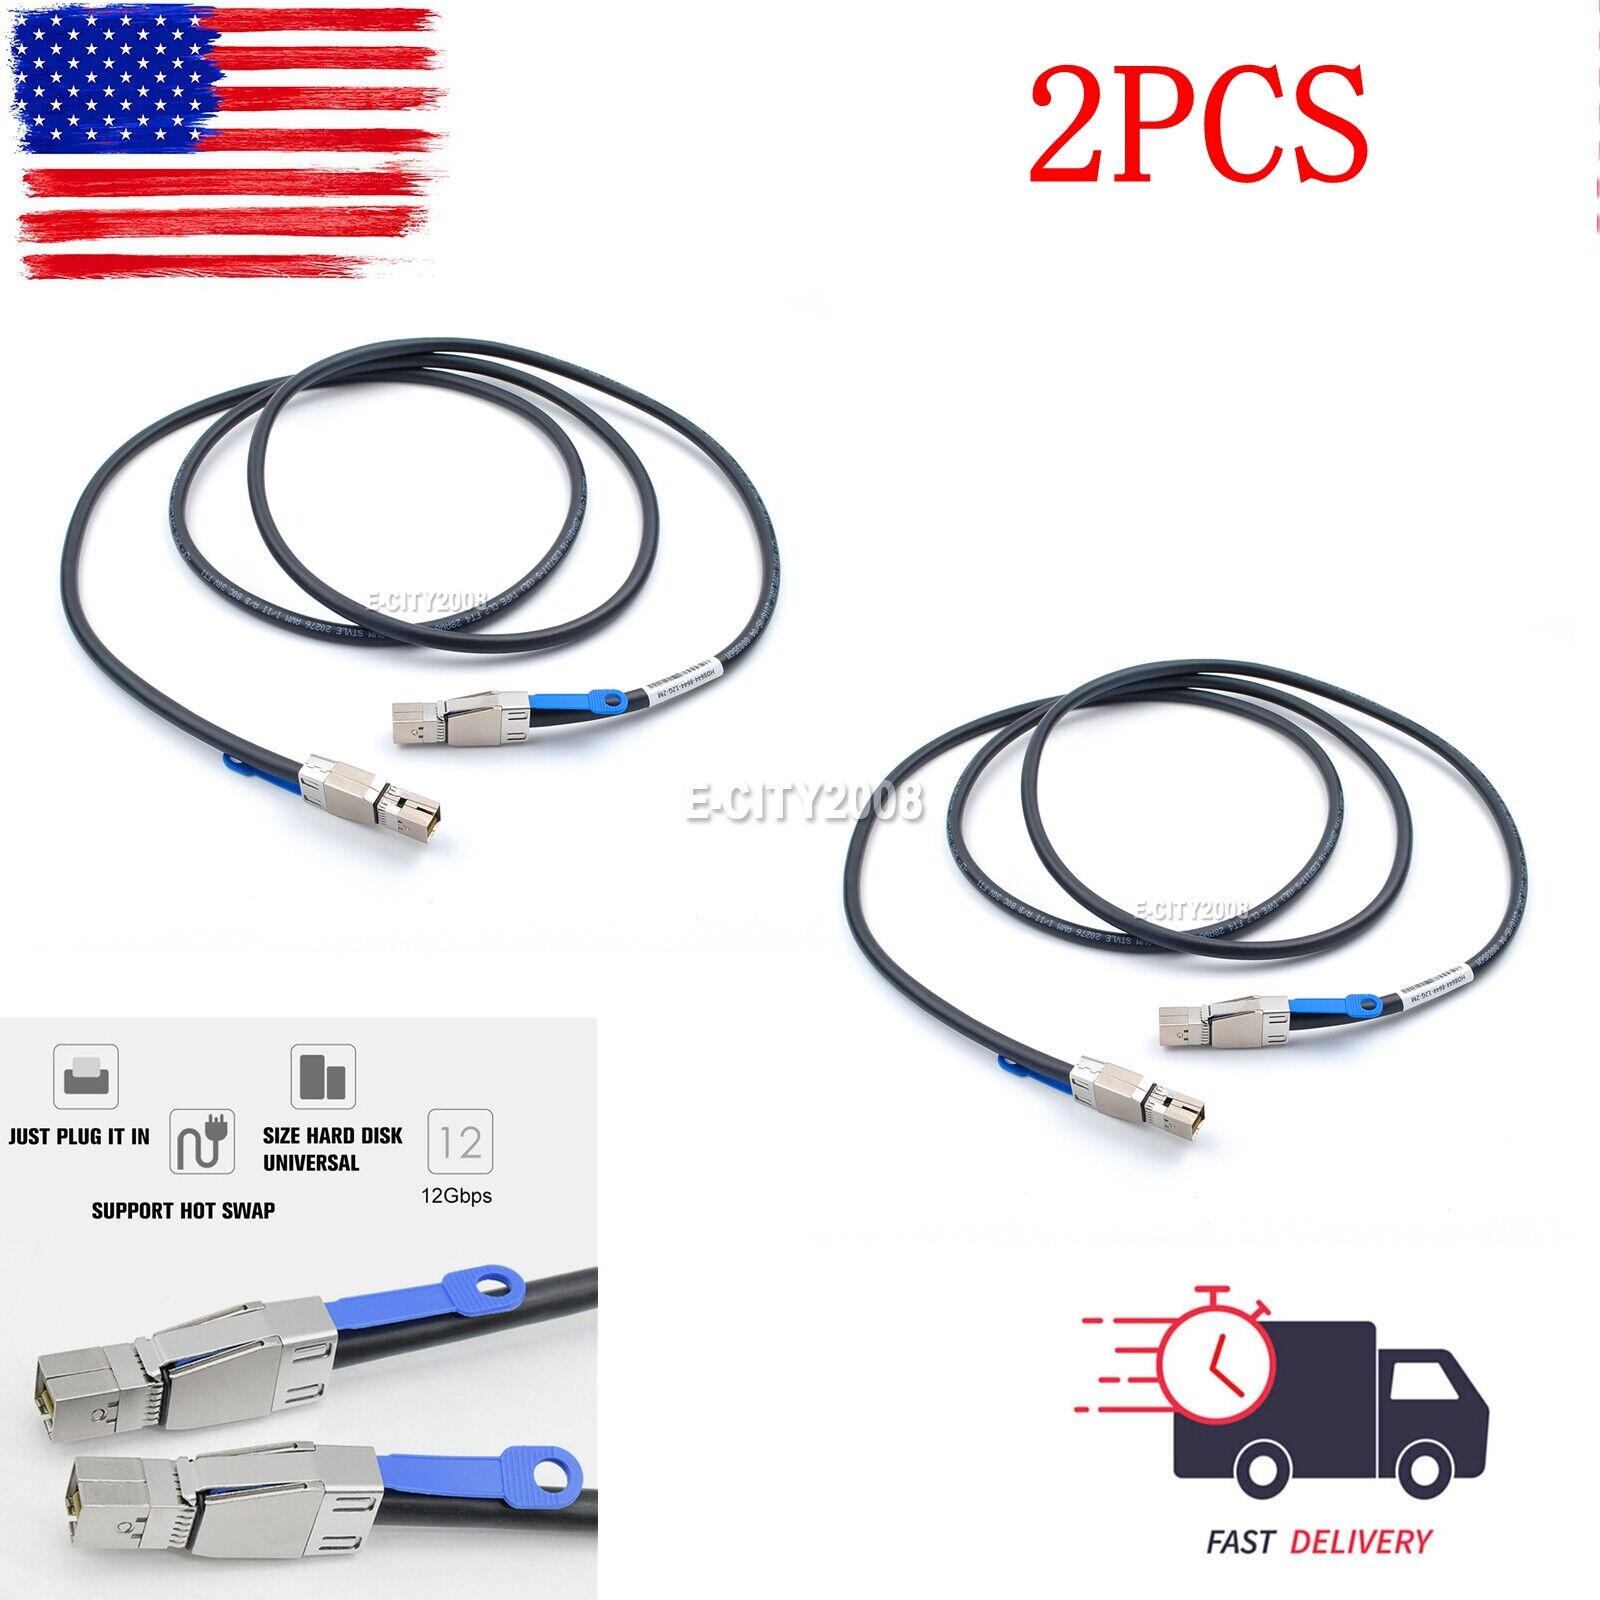 2PCS For DELL SFF-8644 to SFF-8644 Male External HD Mini SAS Cable GYK61 6FT 2M